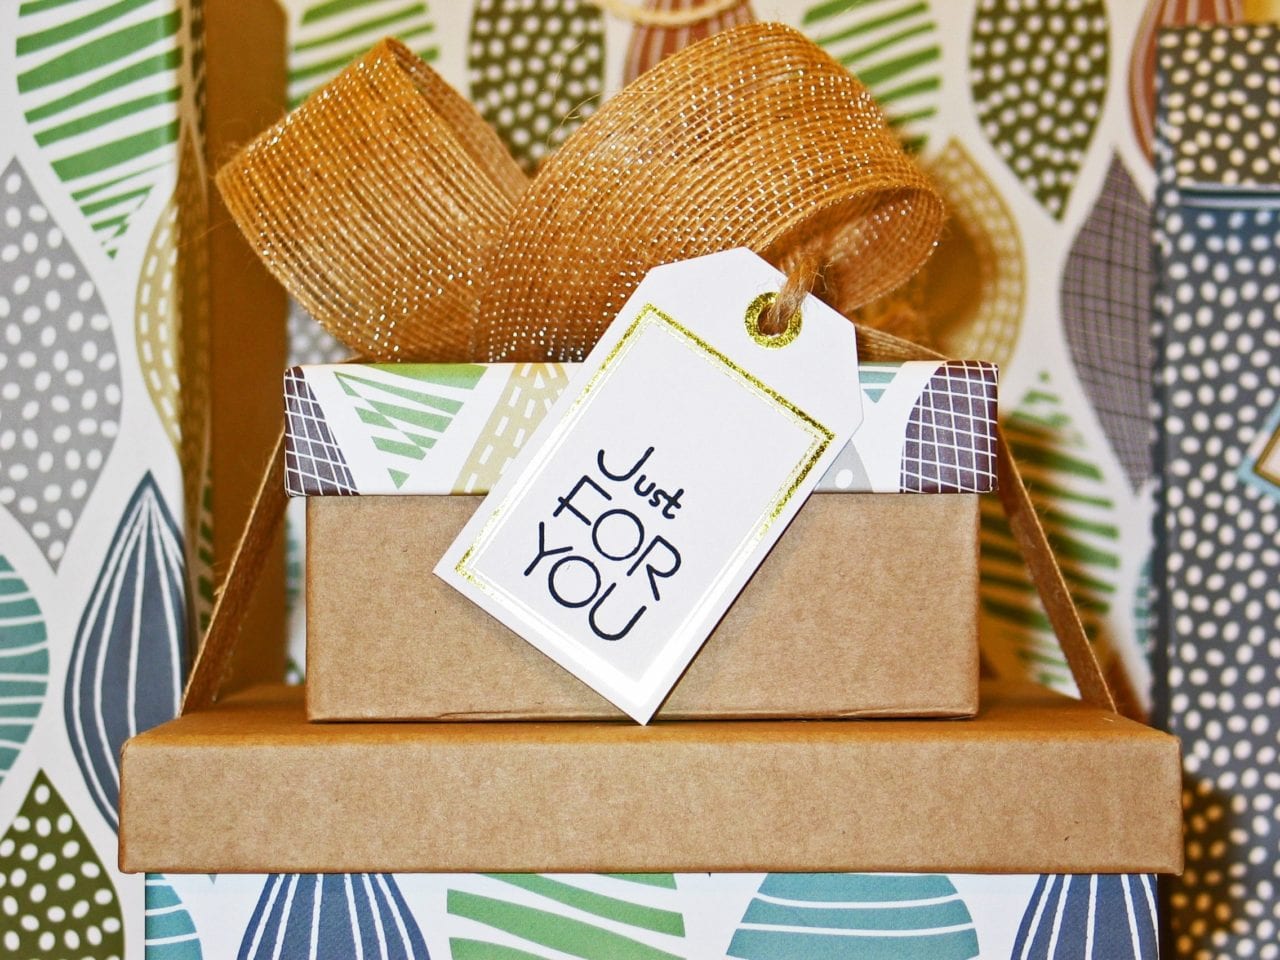 How To Start Your Own Gift Basket Business | Half MBA